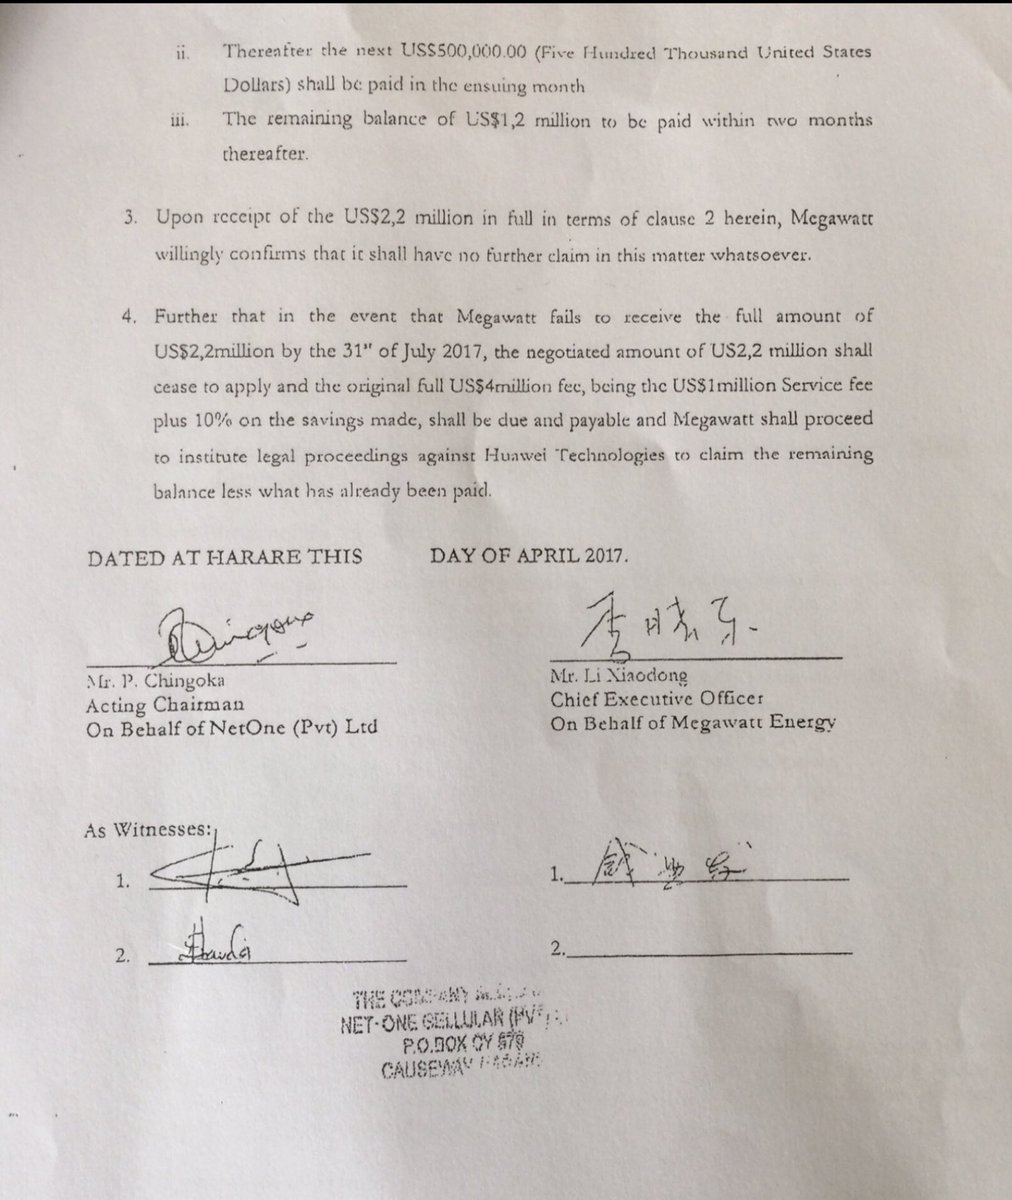 24. After Alex Marufu was forced to resign, Peter Chingoka, another of ex-Minister’s allies, was appointed Acting  @NetOneCellular Chairman. Now that we were out, ex-ICT Minister caused Peter Chingoka to sign illegal Megawatt Energy contract below. Li Xiaodong signed for Megawatt